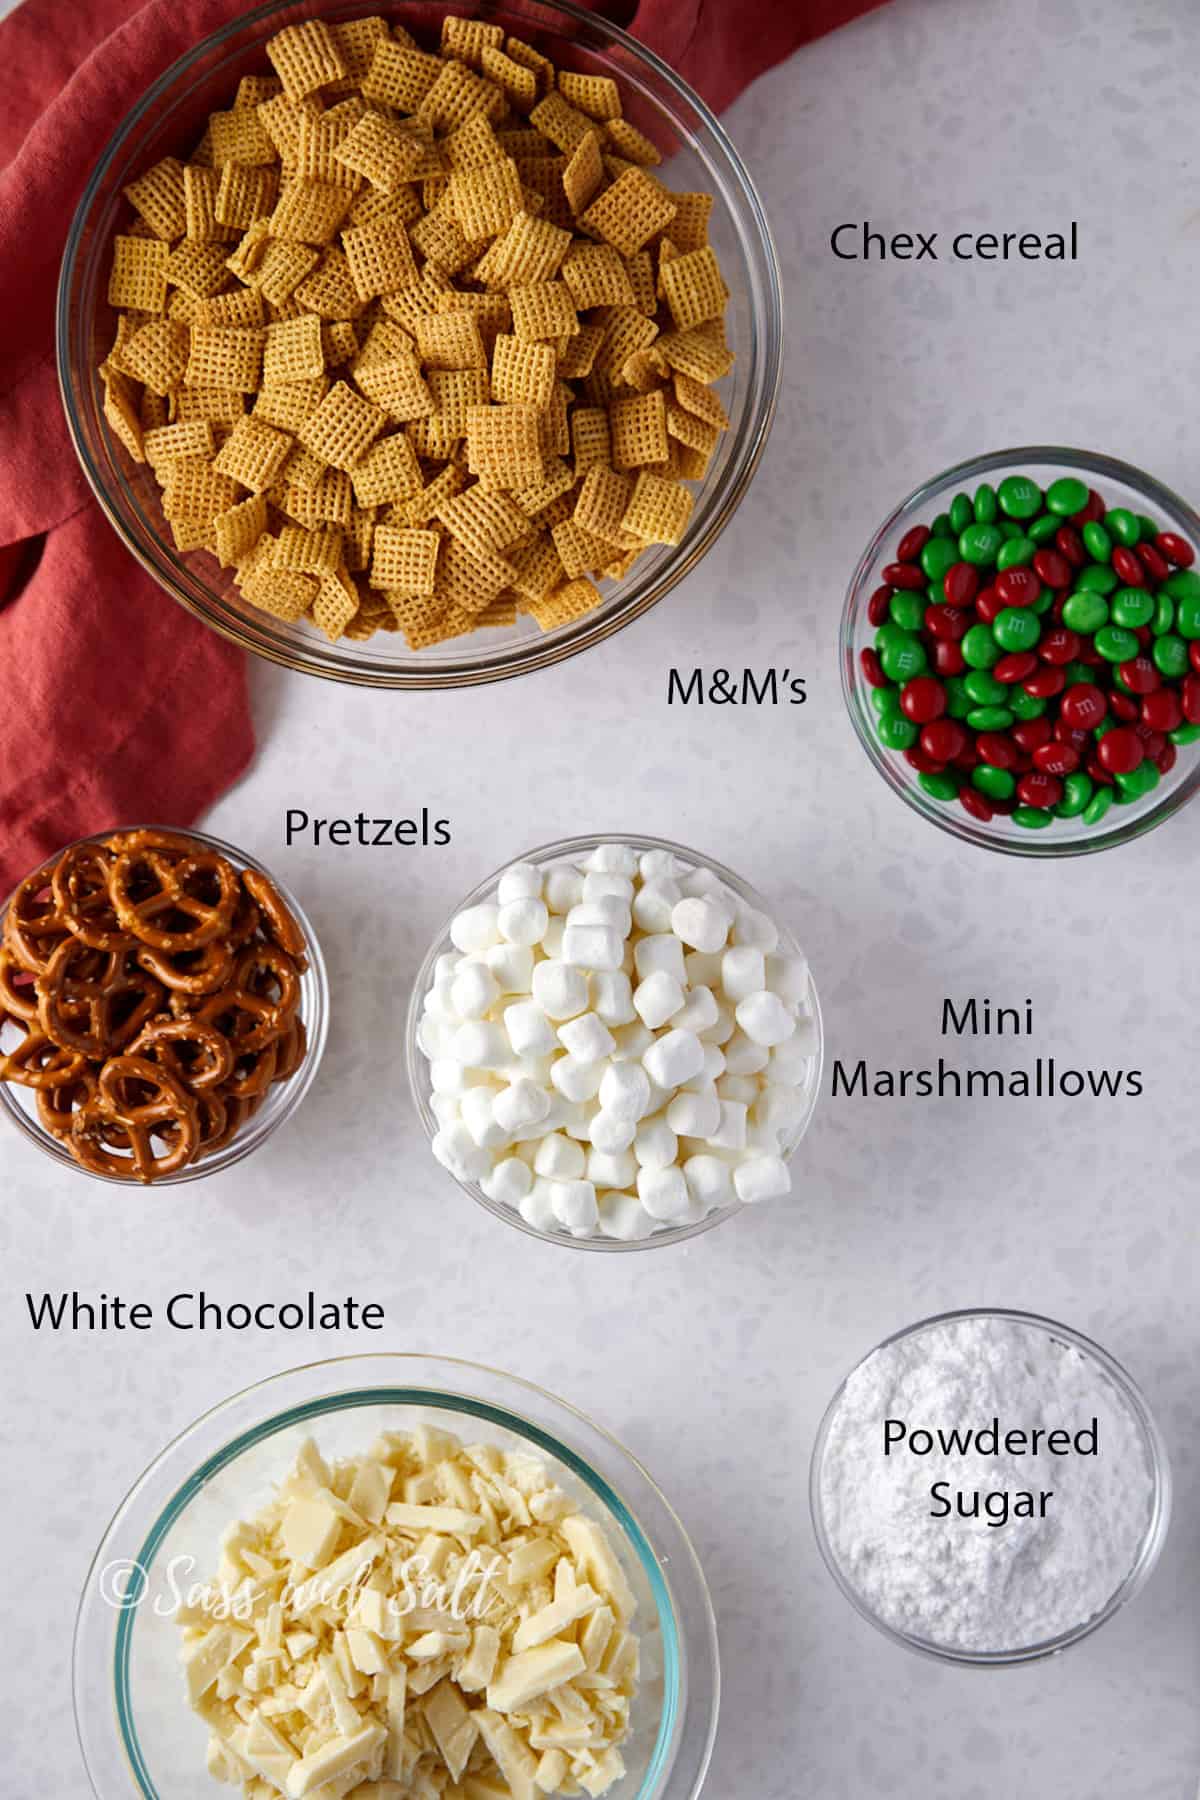 Overhead view of white chocolate Christmas Chex mix with M&M's ingredients in glass bowls.